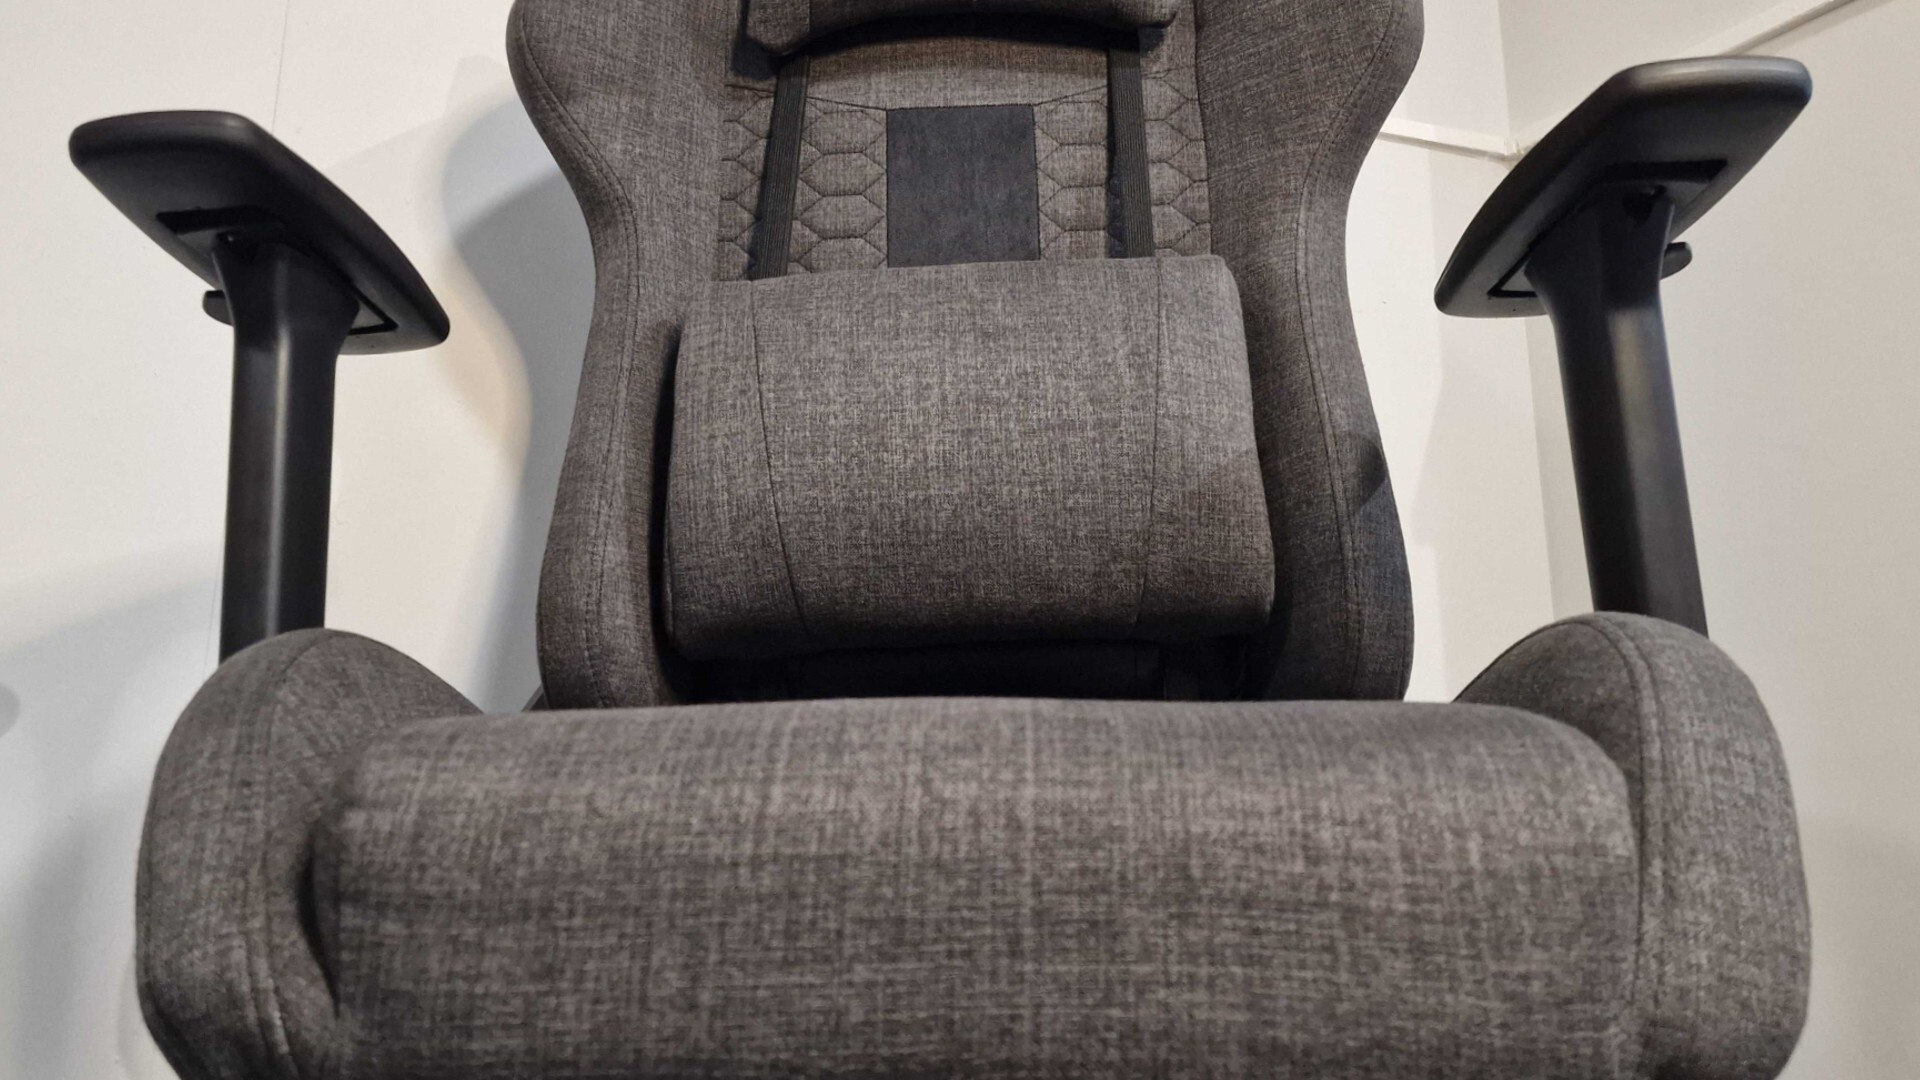 Corsair TC100 Relaxed review: The seatbase of a gaming chair, looking up at its armrests and lumbar cushion